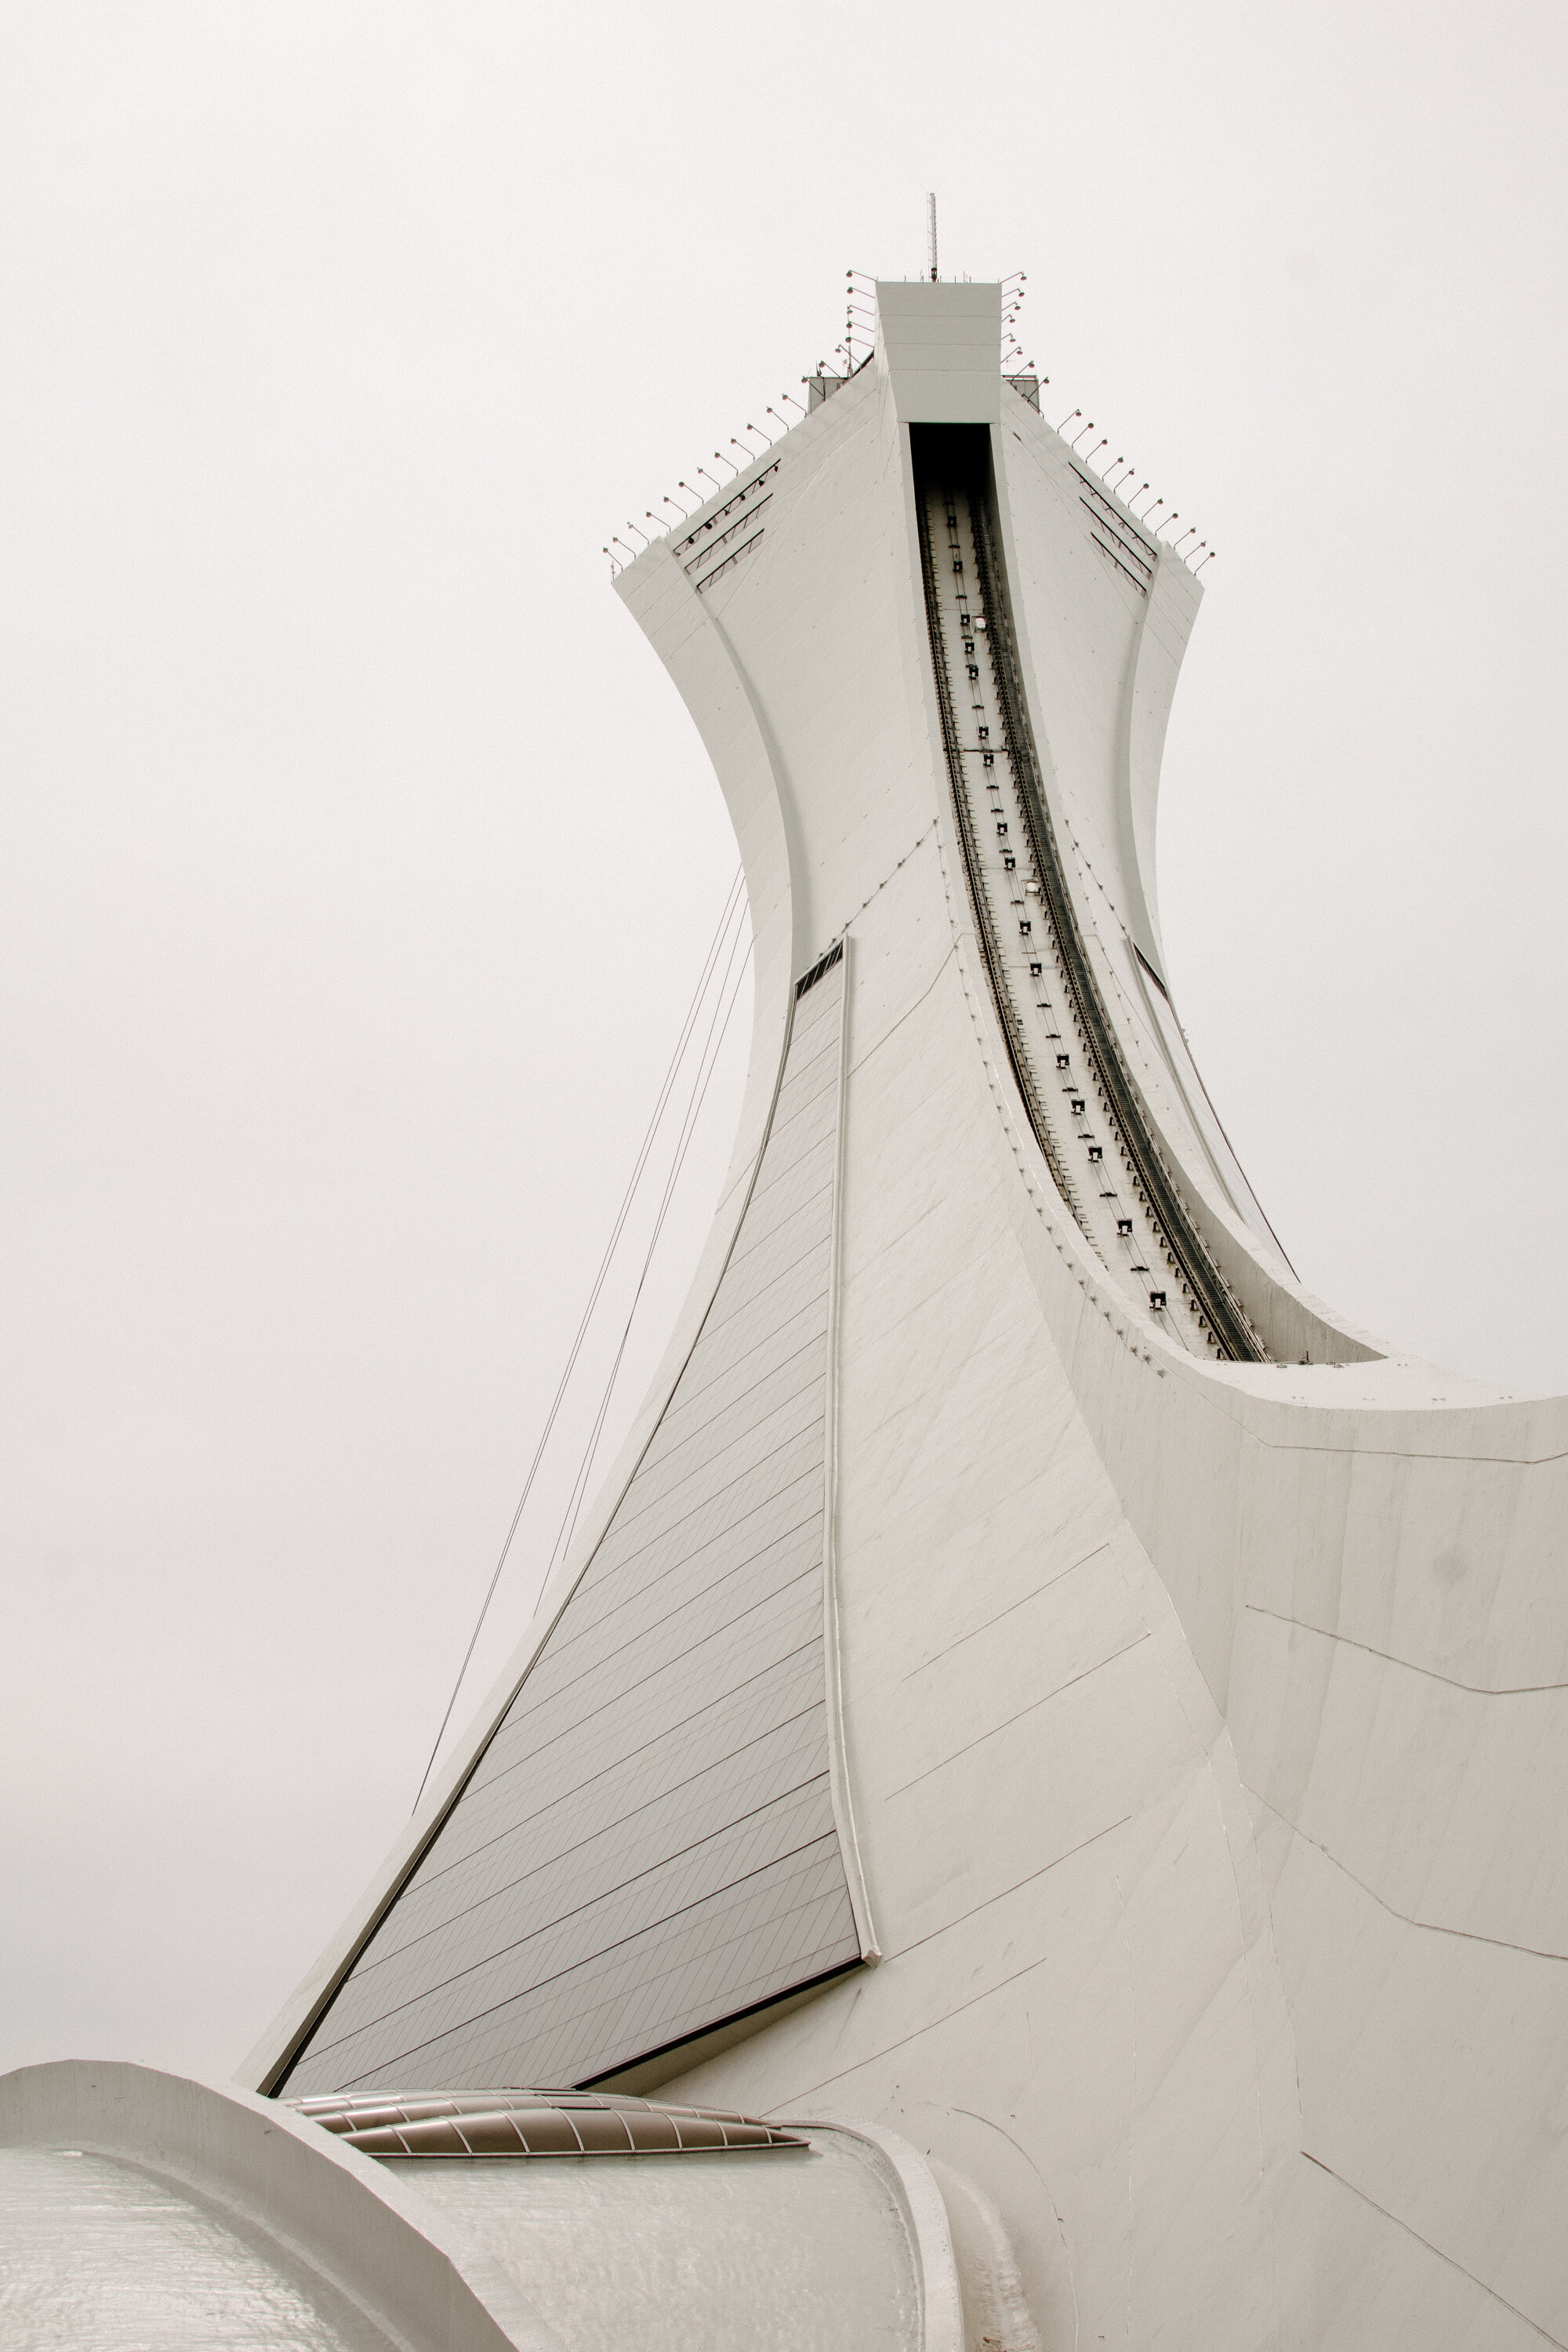 20200328_photo_tour-stade-olympique-photographe-documentaire-a-montreal-architecture-005.jpg